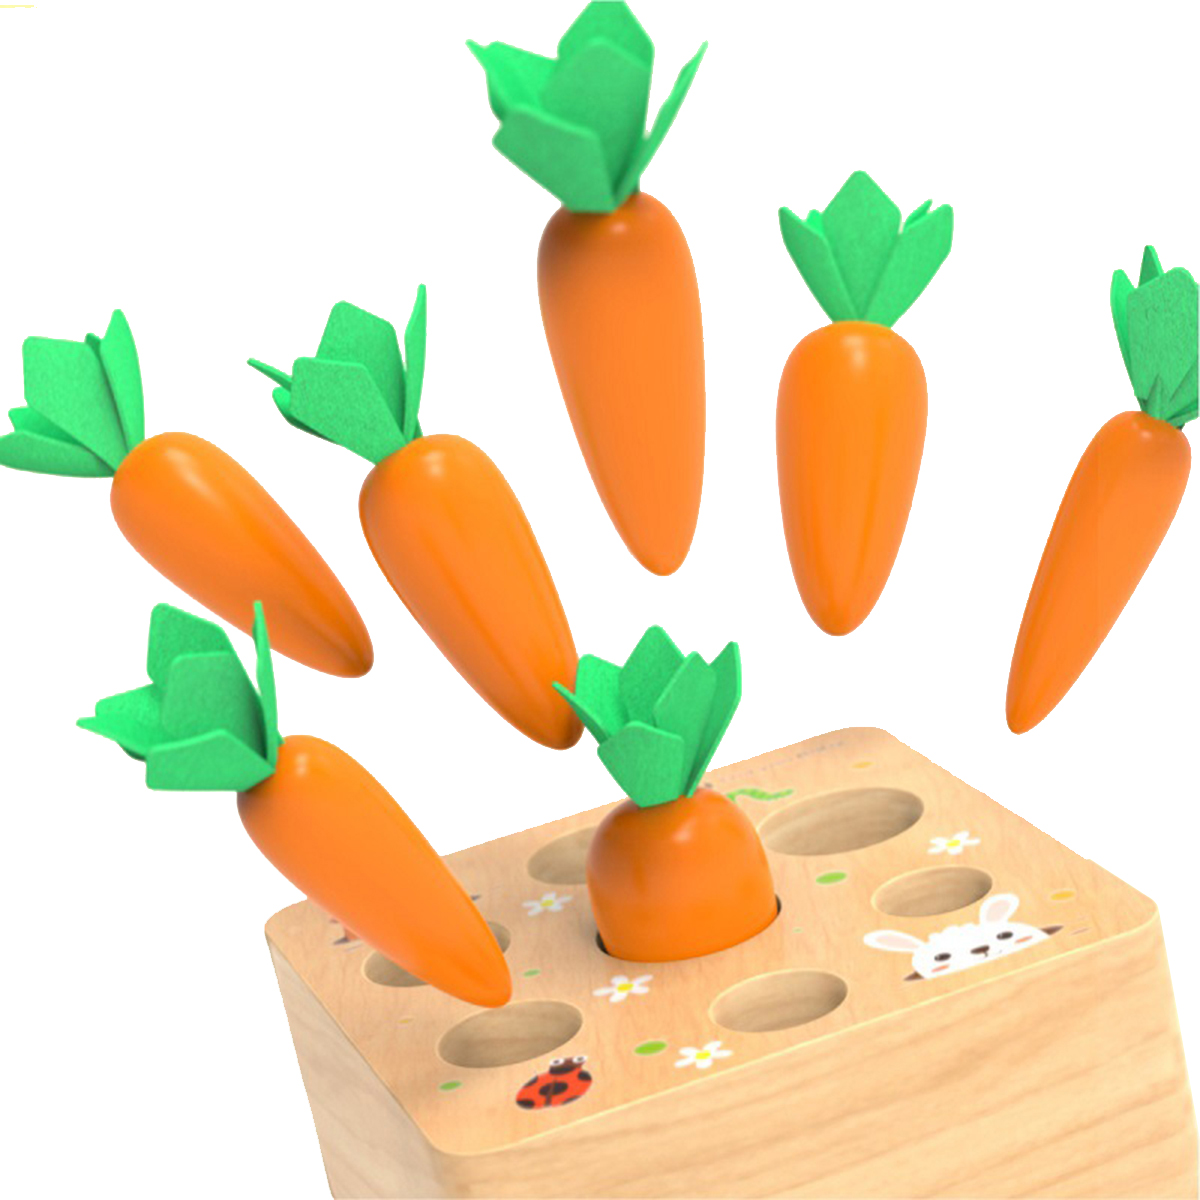 Kids-Wooden-Building-Blocks-Pulling-Carrot-Game-Children-Early-Educational-Toys-1676982-4